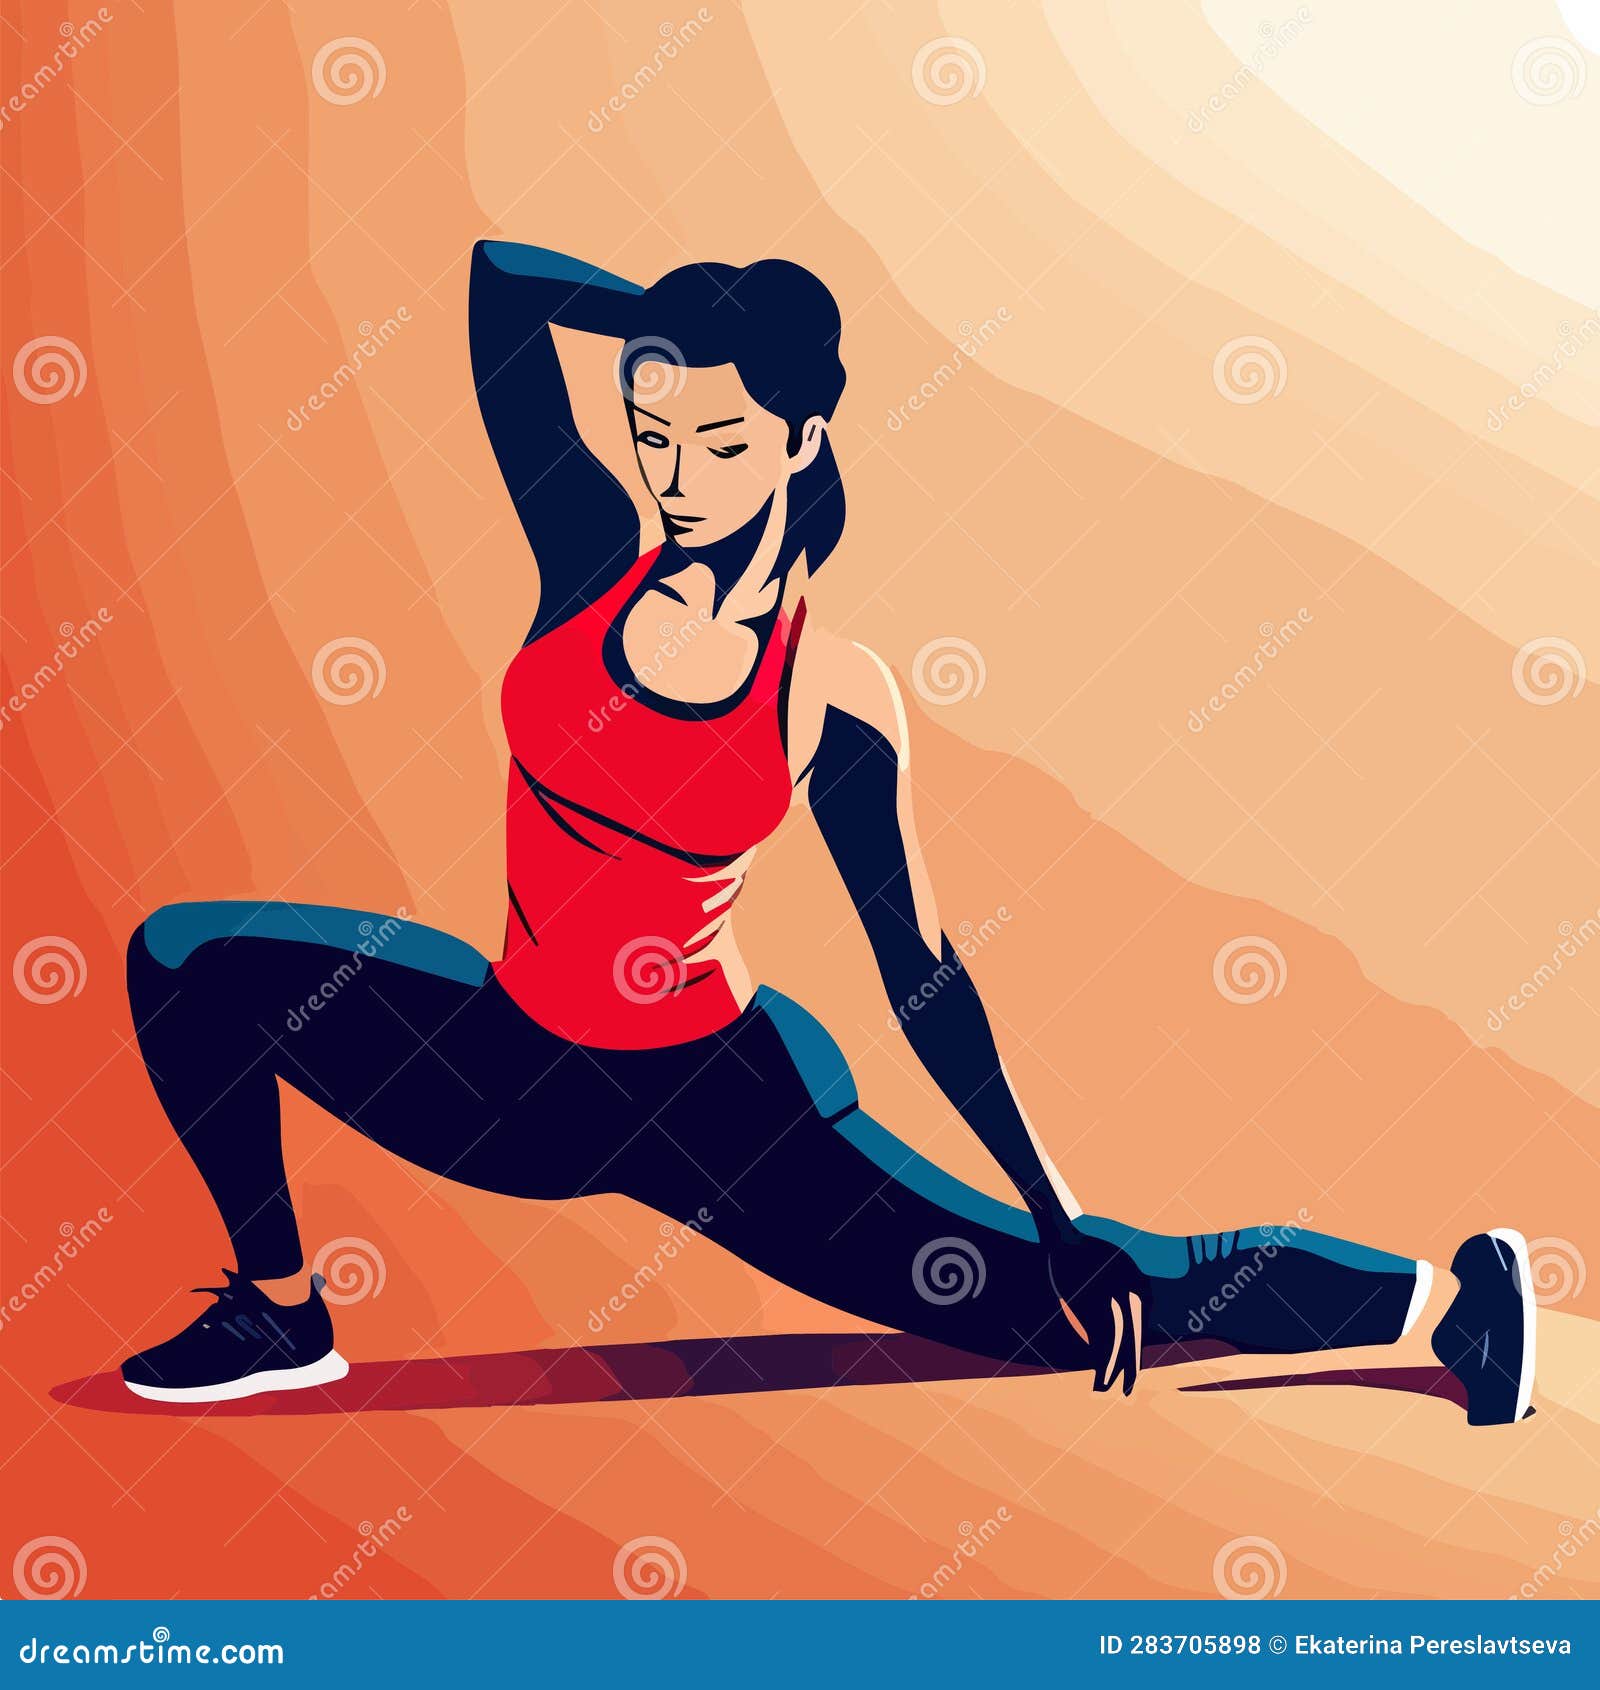 Stretching Exercise Cartoon Image Picture Stock Illustrations